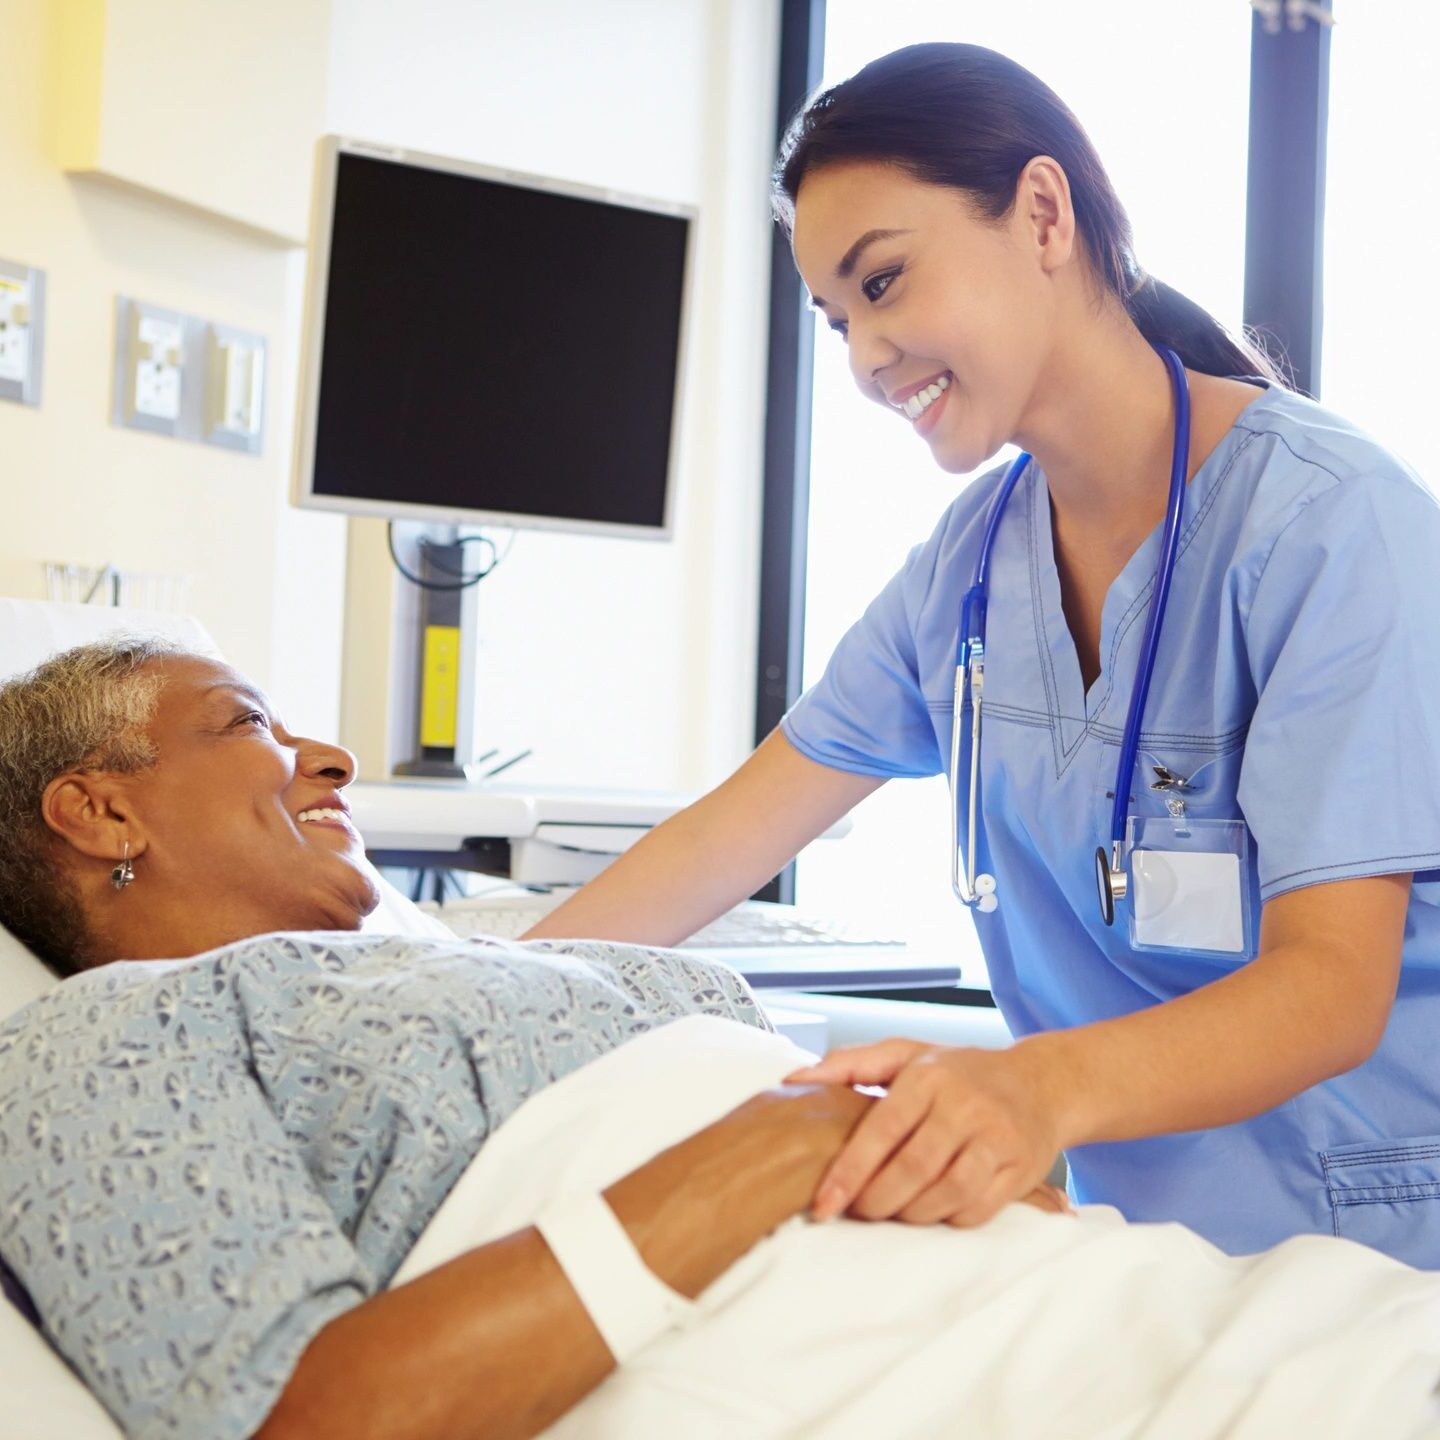 A nurse is caring for an elderly patient in the hospital.